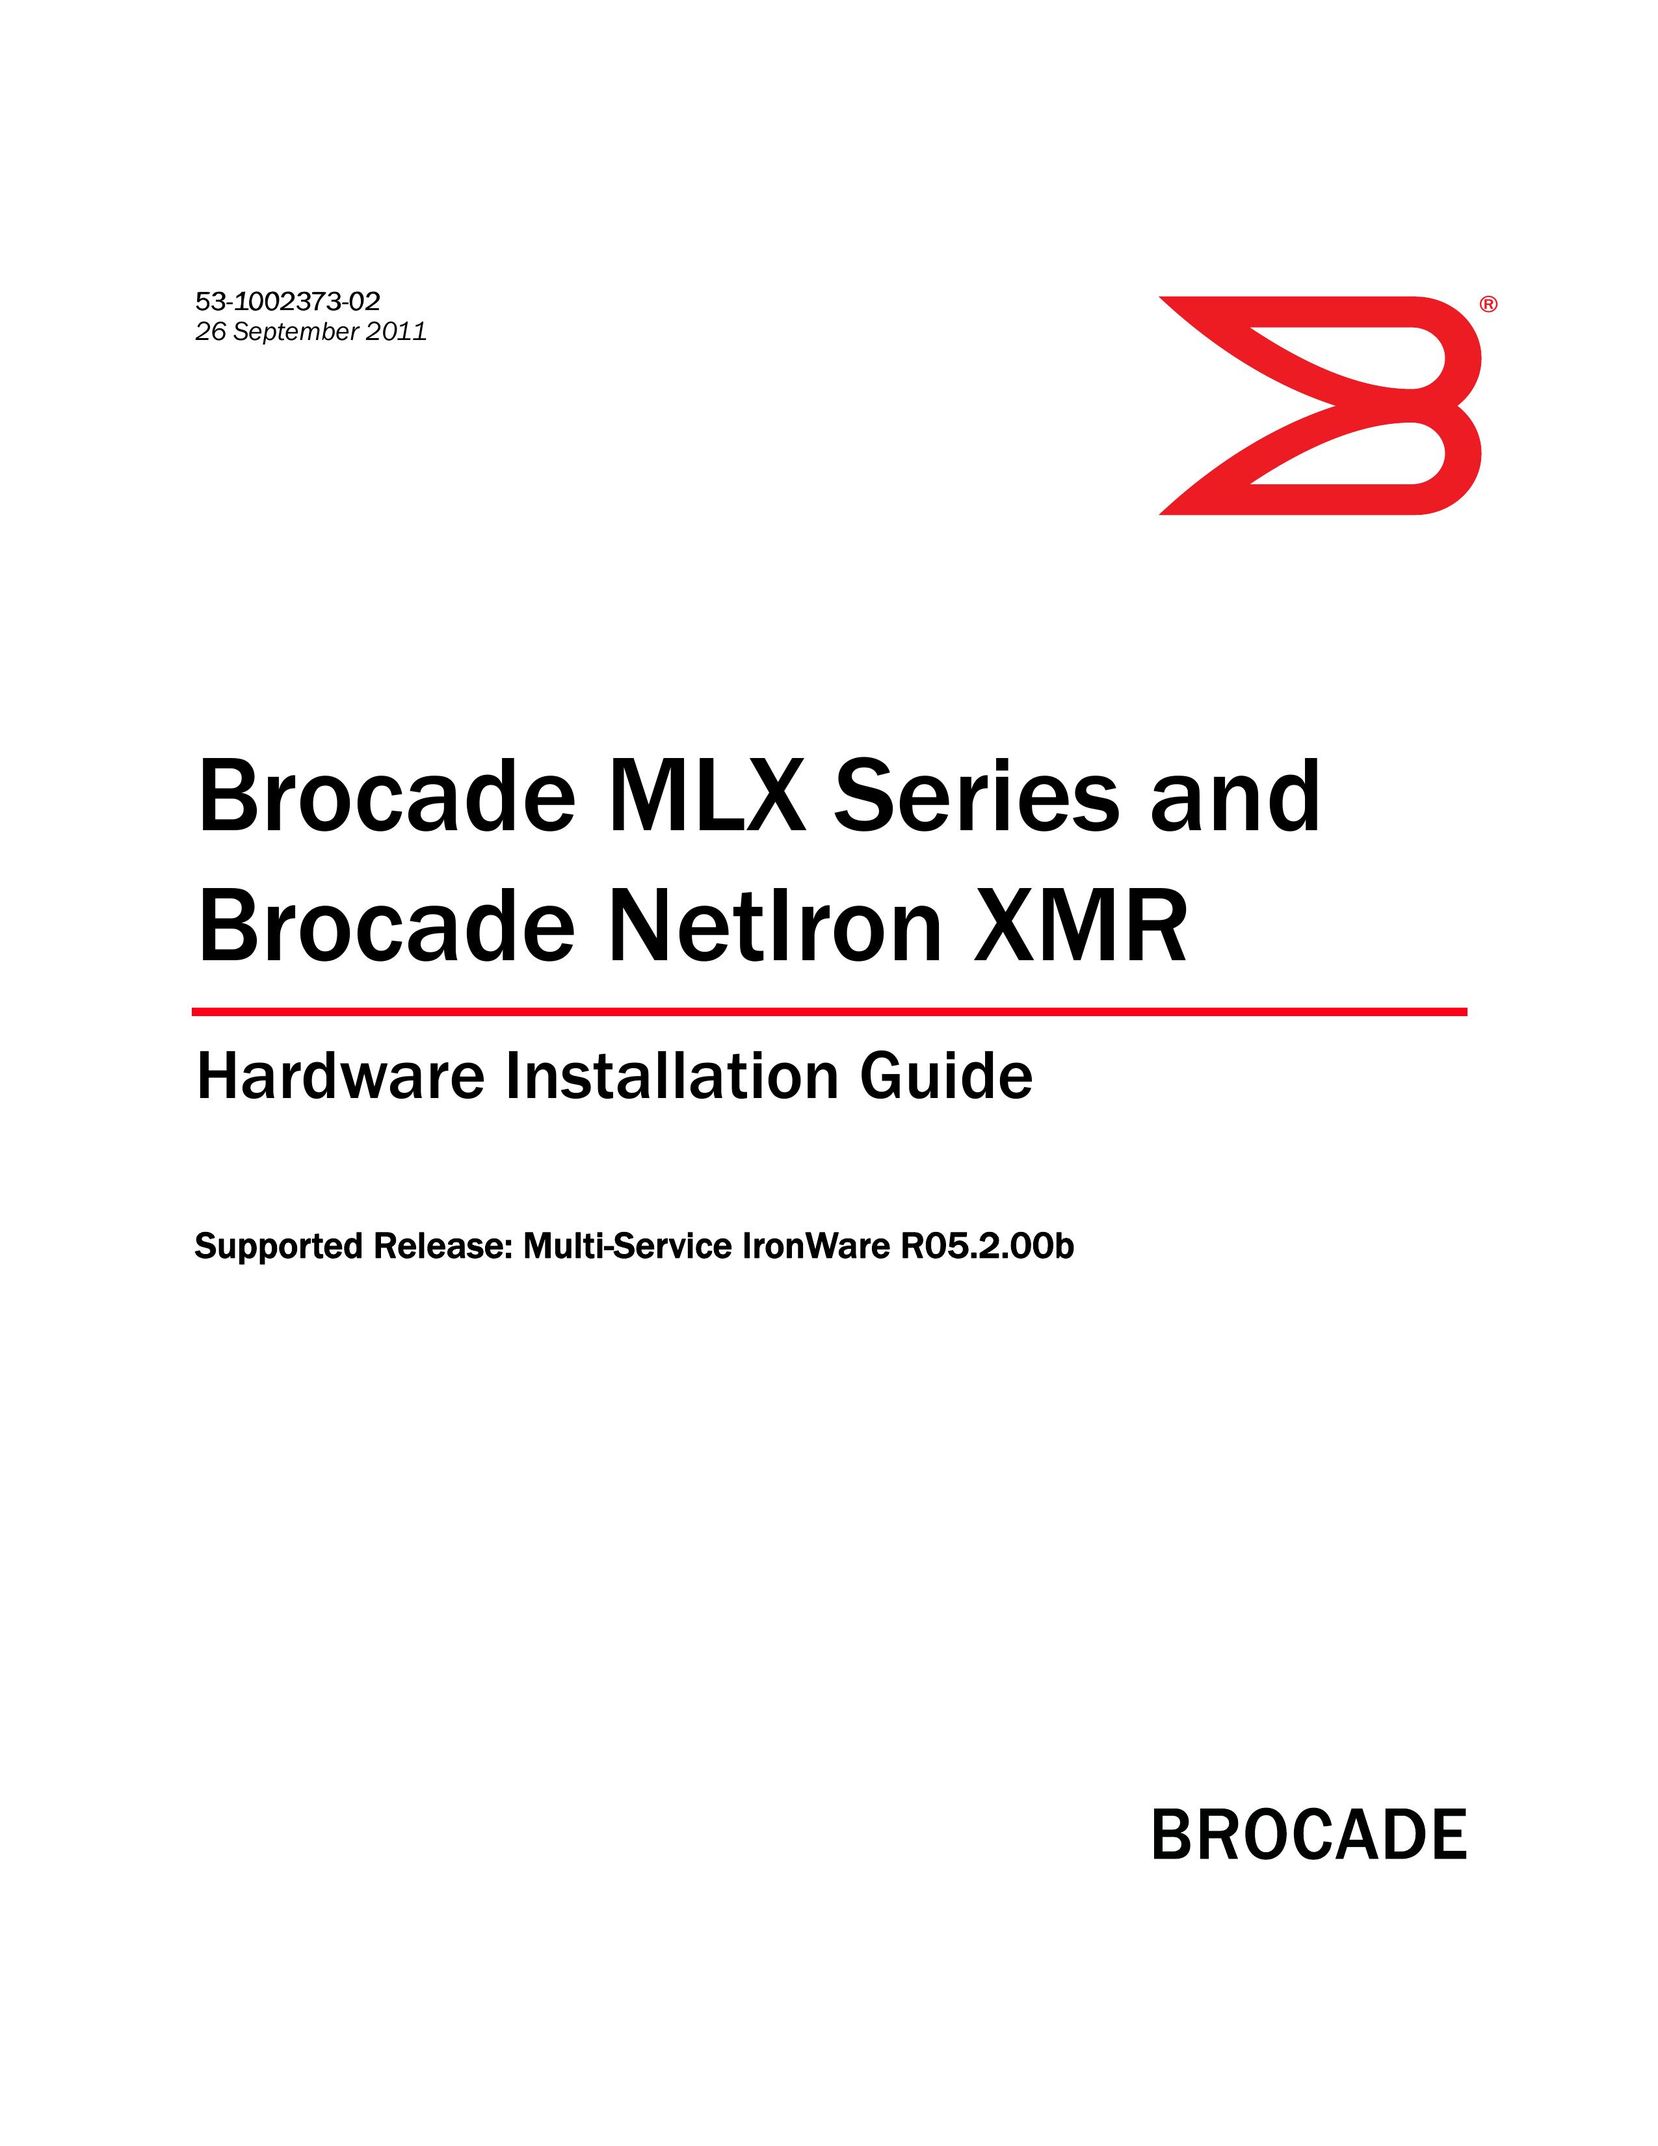 Brocade Communications Systems 53-1002373-02 Network Router User Manual